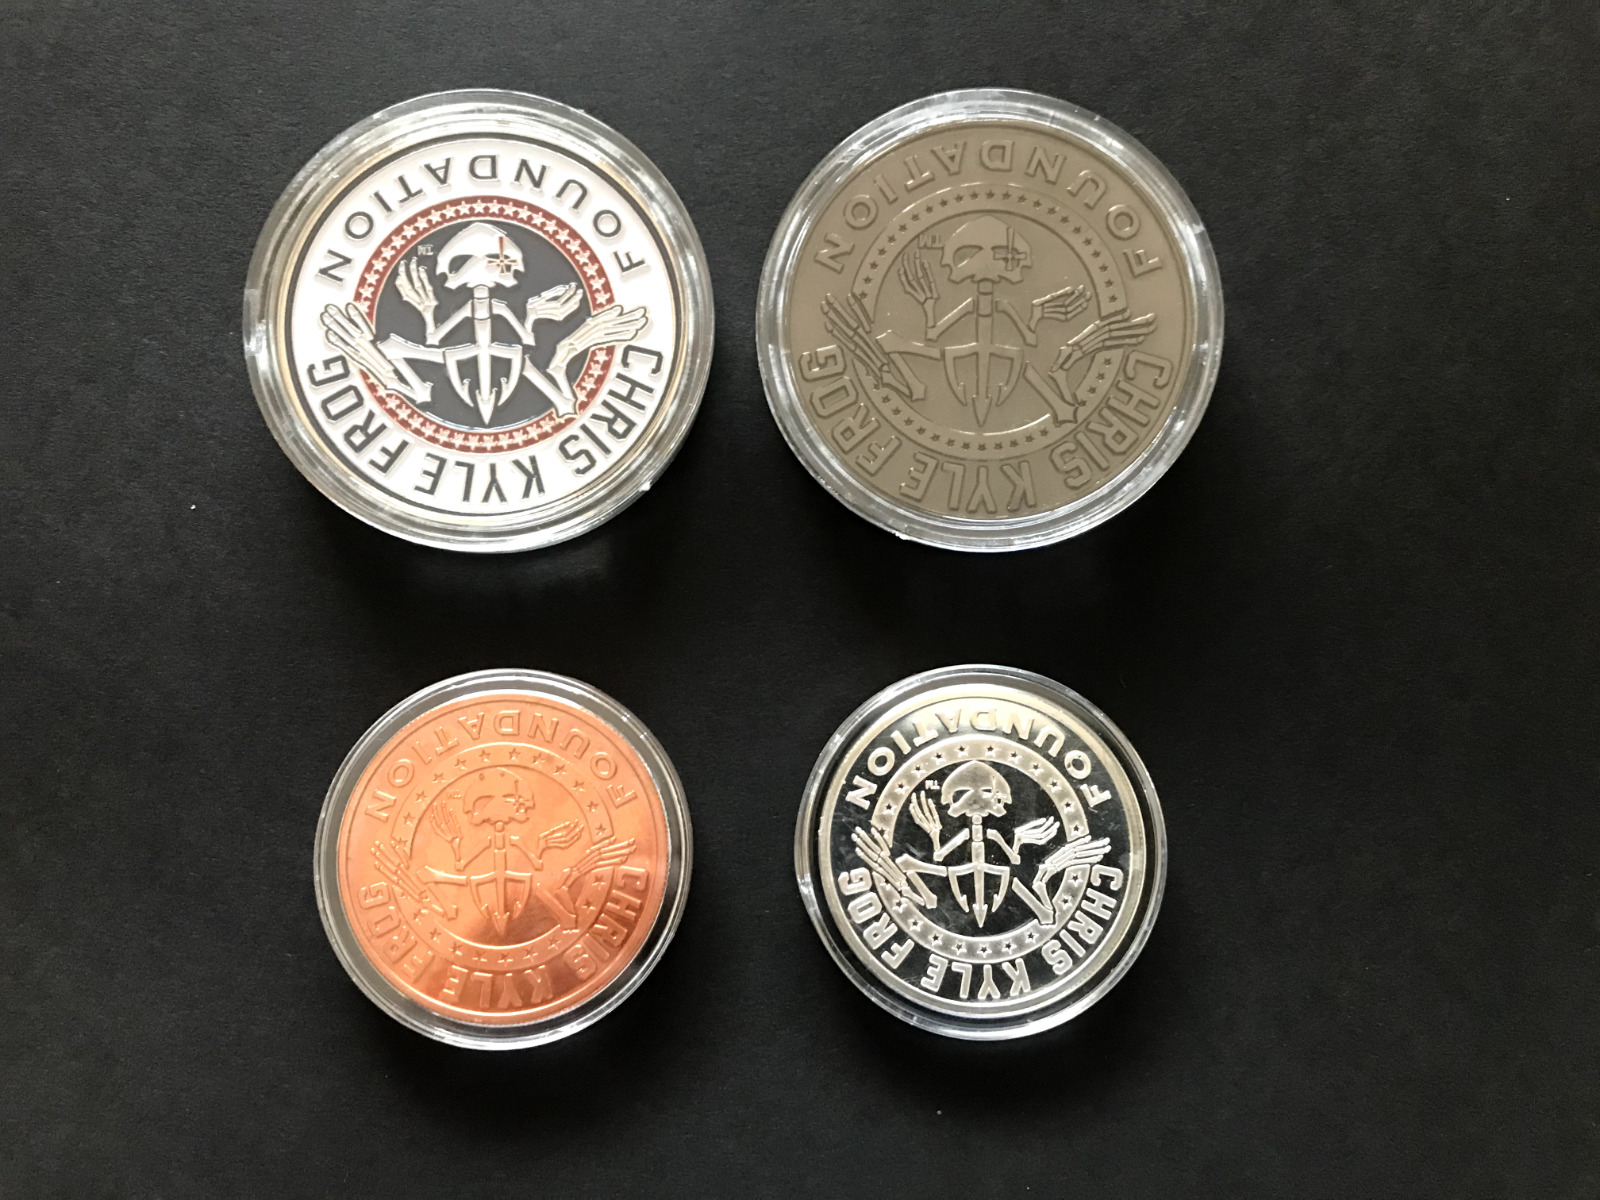 CHRIS KYLE - FROG FOUNDATION CHALLENGE COIN COLLECTION - EXTREMELY RARE